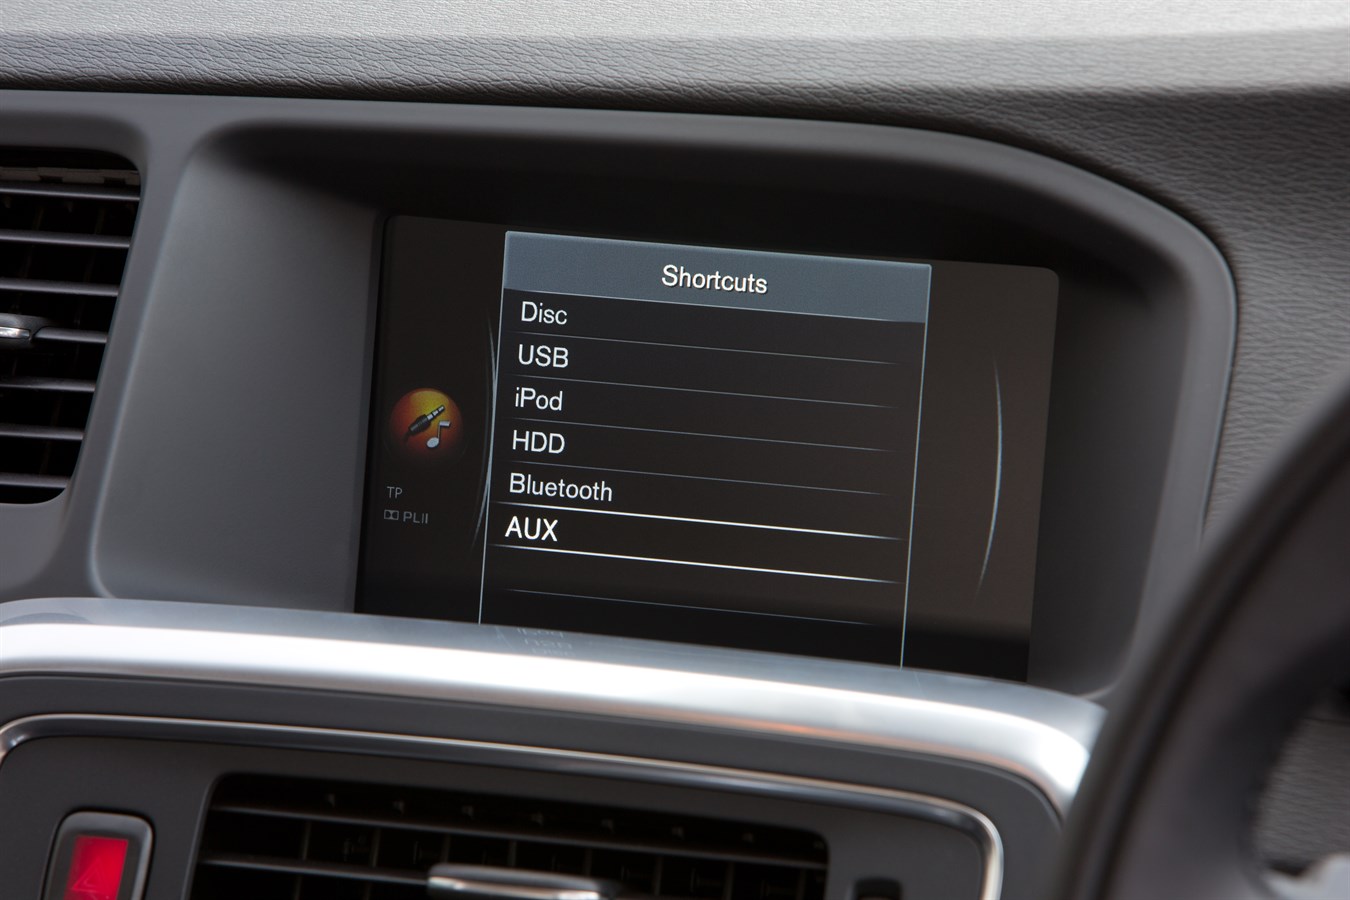 HMI (centre) screen showing available media options